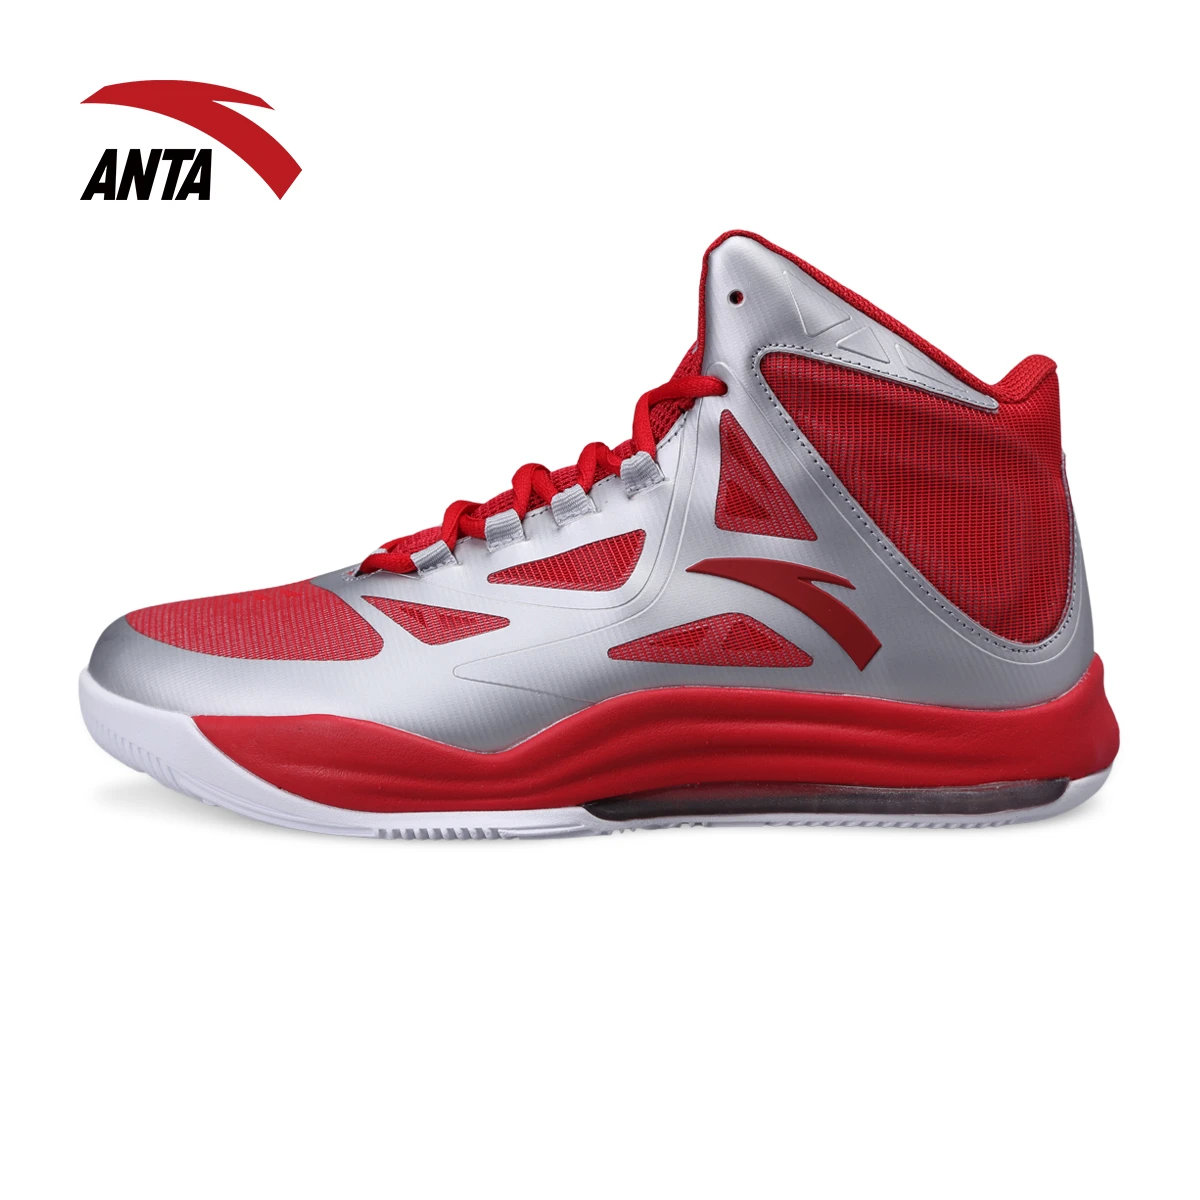 Anta Sports Shoes Shoes Autumn 2015 Elastic Rubber Basketball Shoes Against  Spraining Basketball Boots |11531301 - Running Shoes - AliExpress